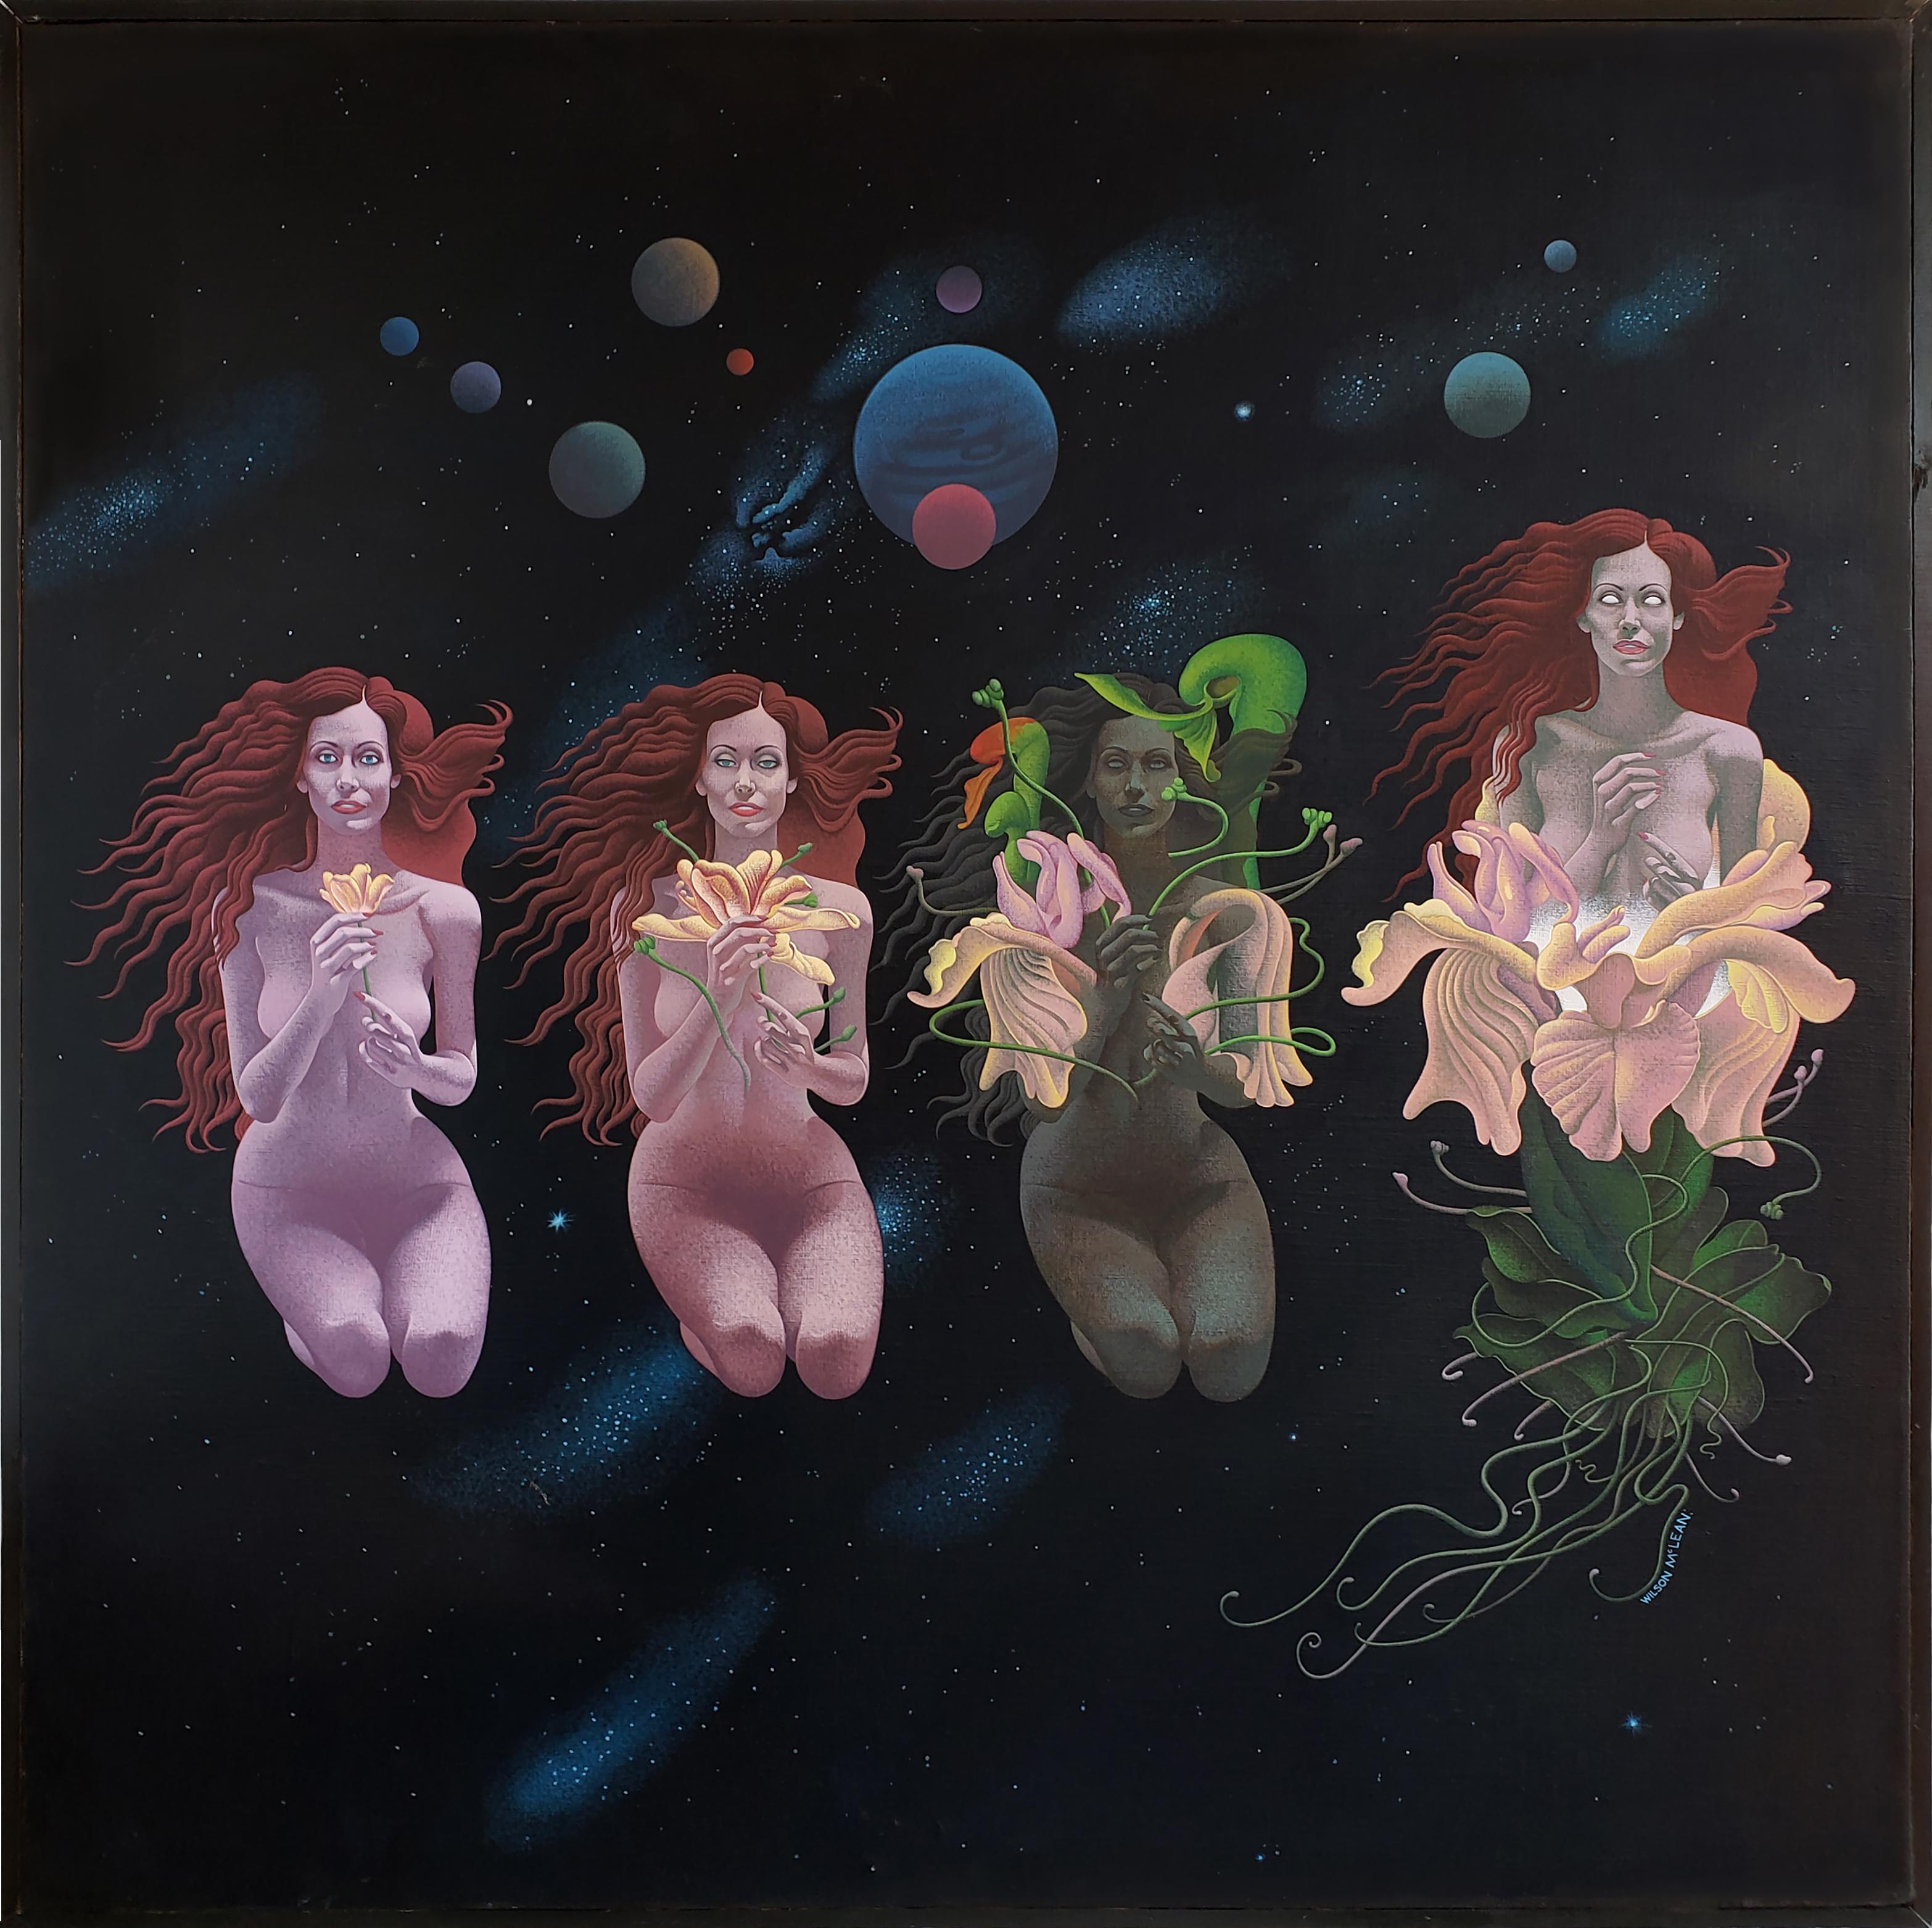 Wilson McLean Nude Painting - Celestial Metamorphosis -Nude Sci-Fi Woman becomes a flower in outer space